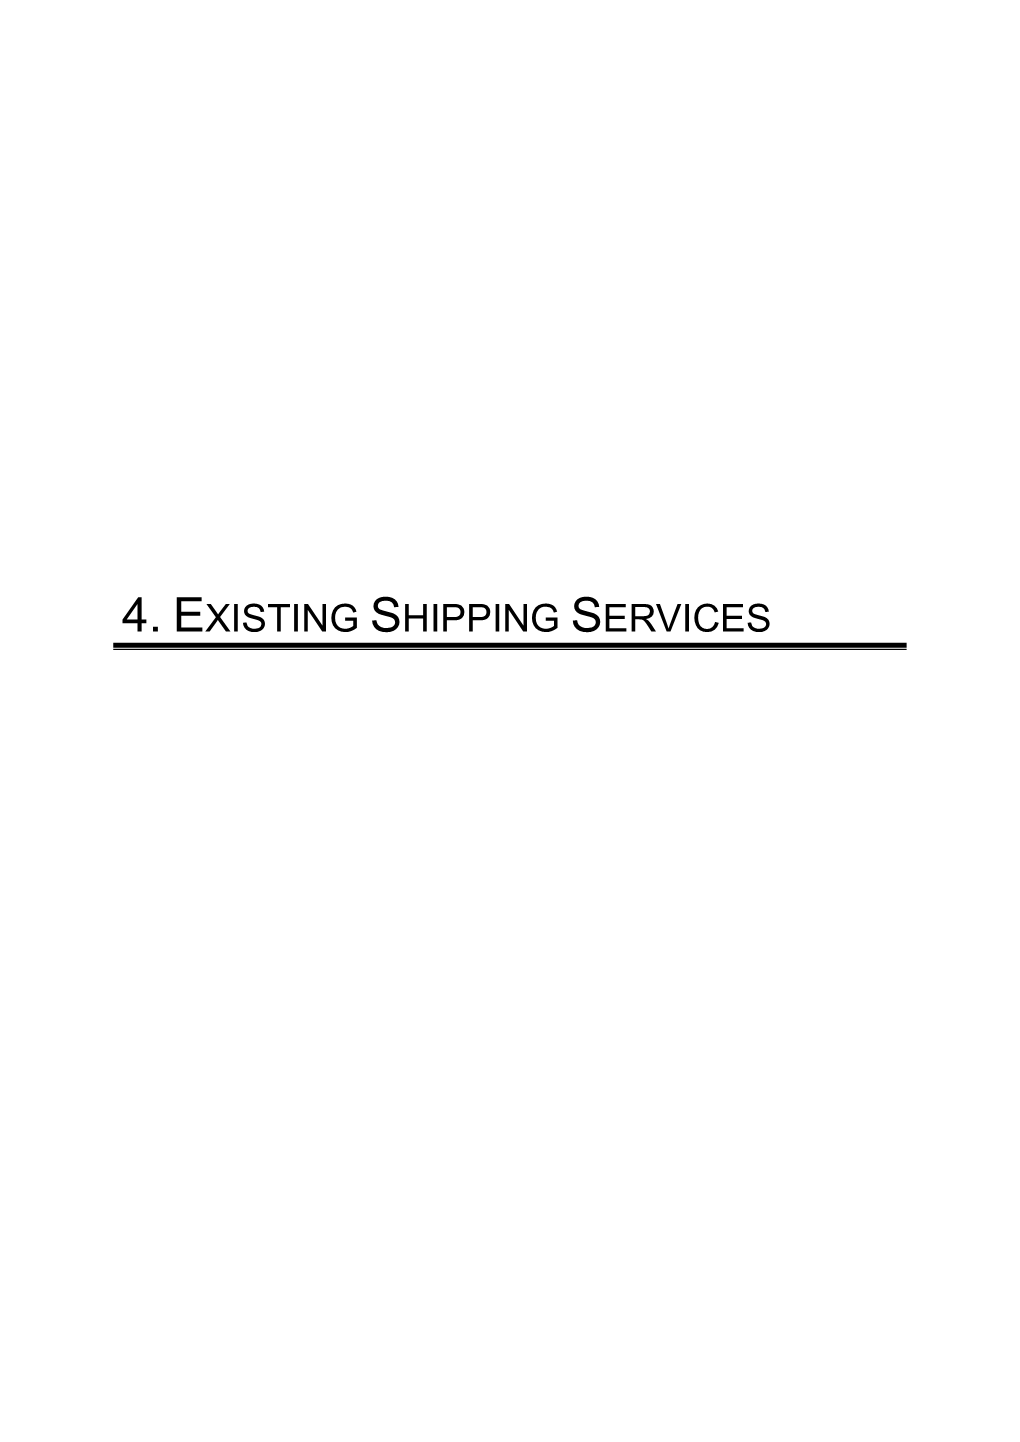 4. Existing Shipping Services